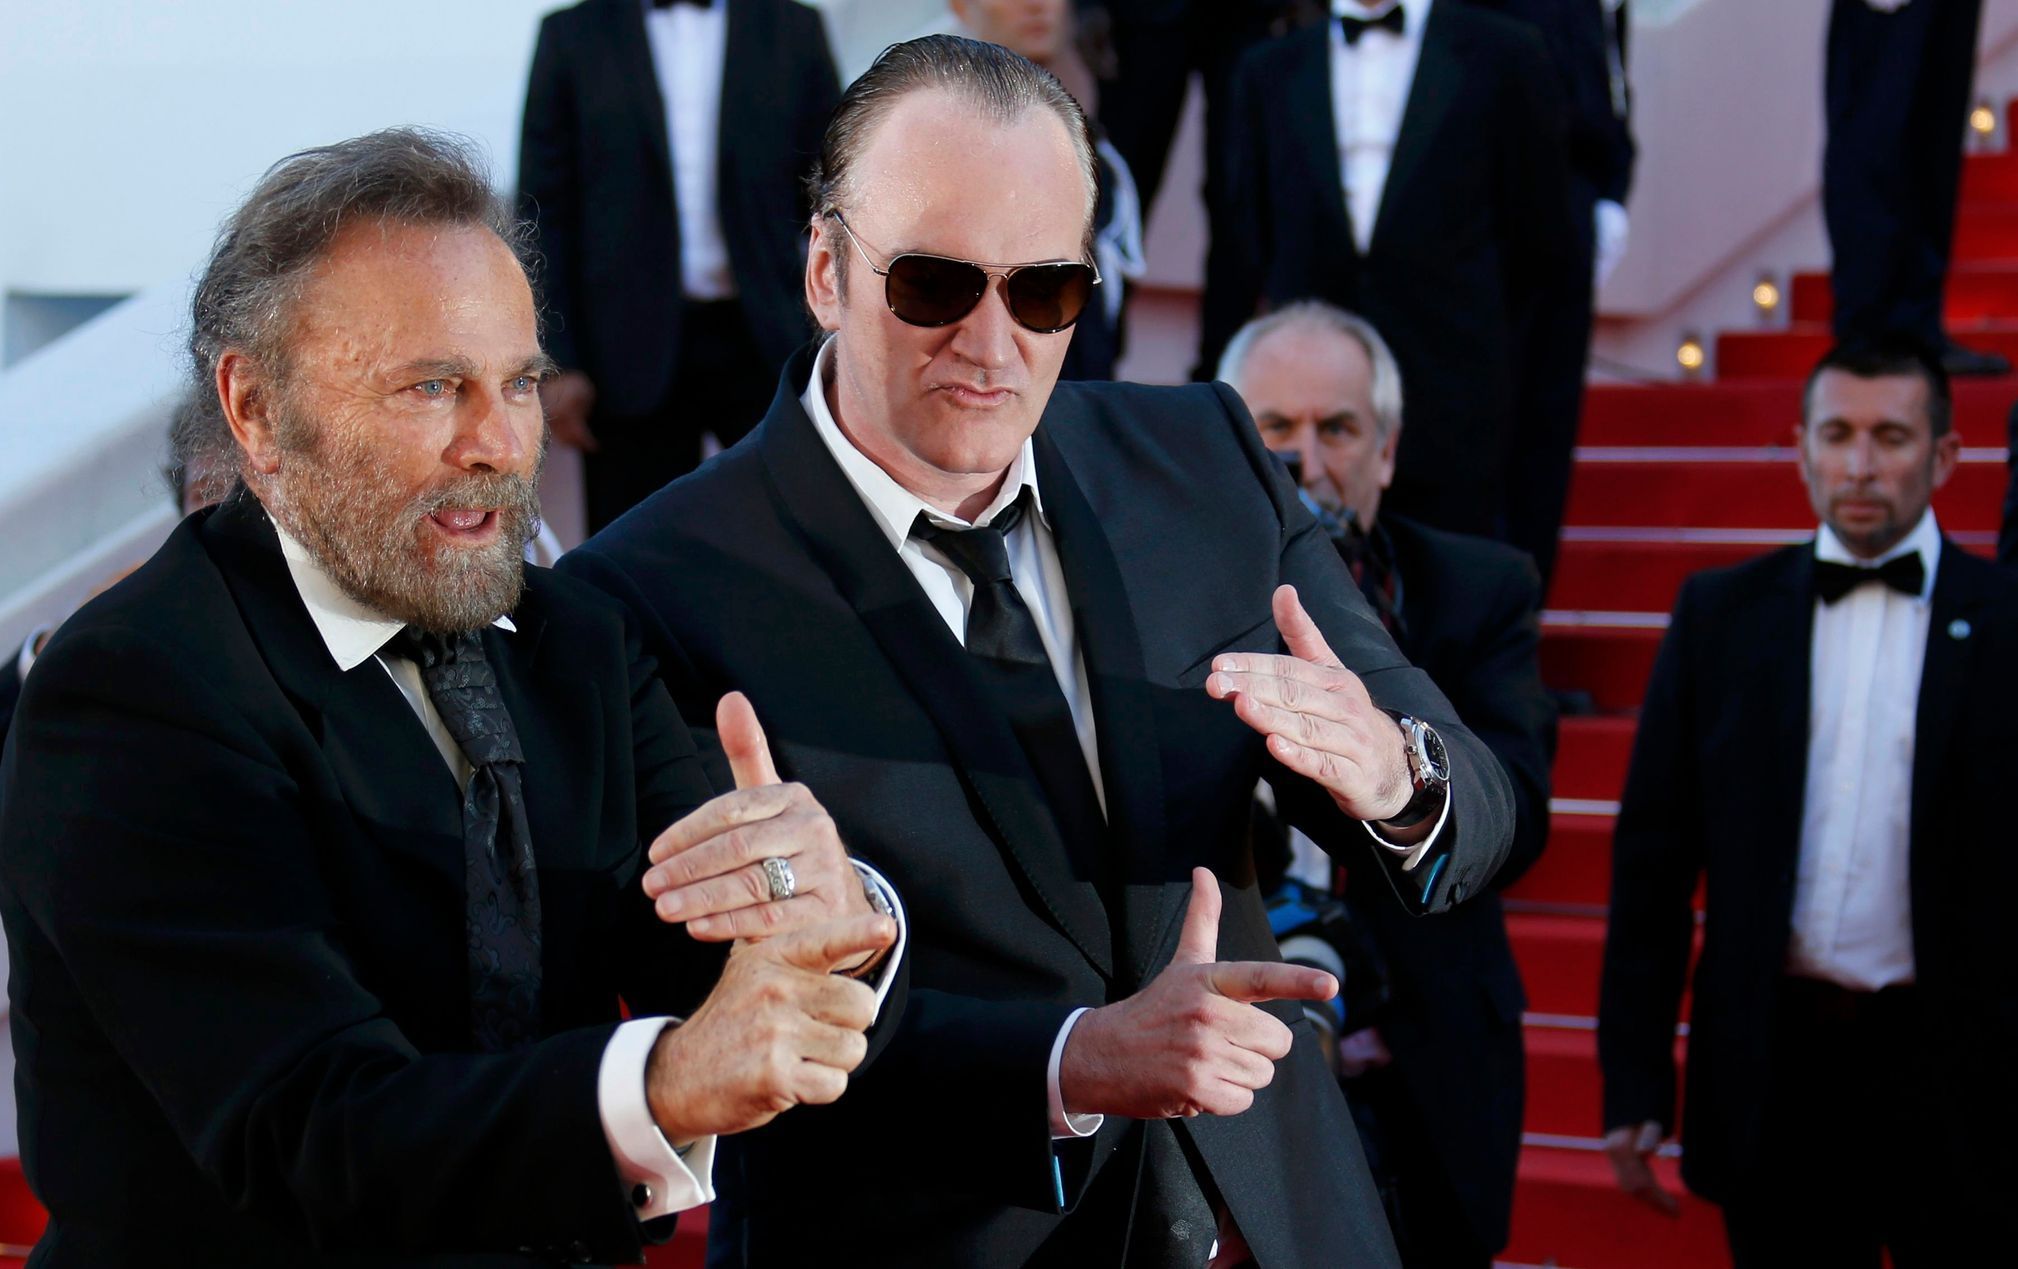 Director Quentin Tarantino and actor Franco Nero pose on the red carpet as they arrive at the closing ceremony of the 67th Cannes Film Festival in Cannes